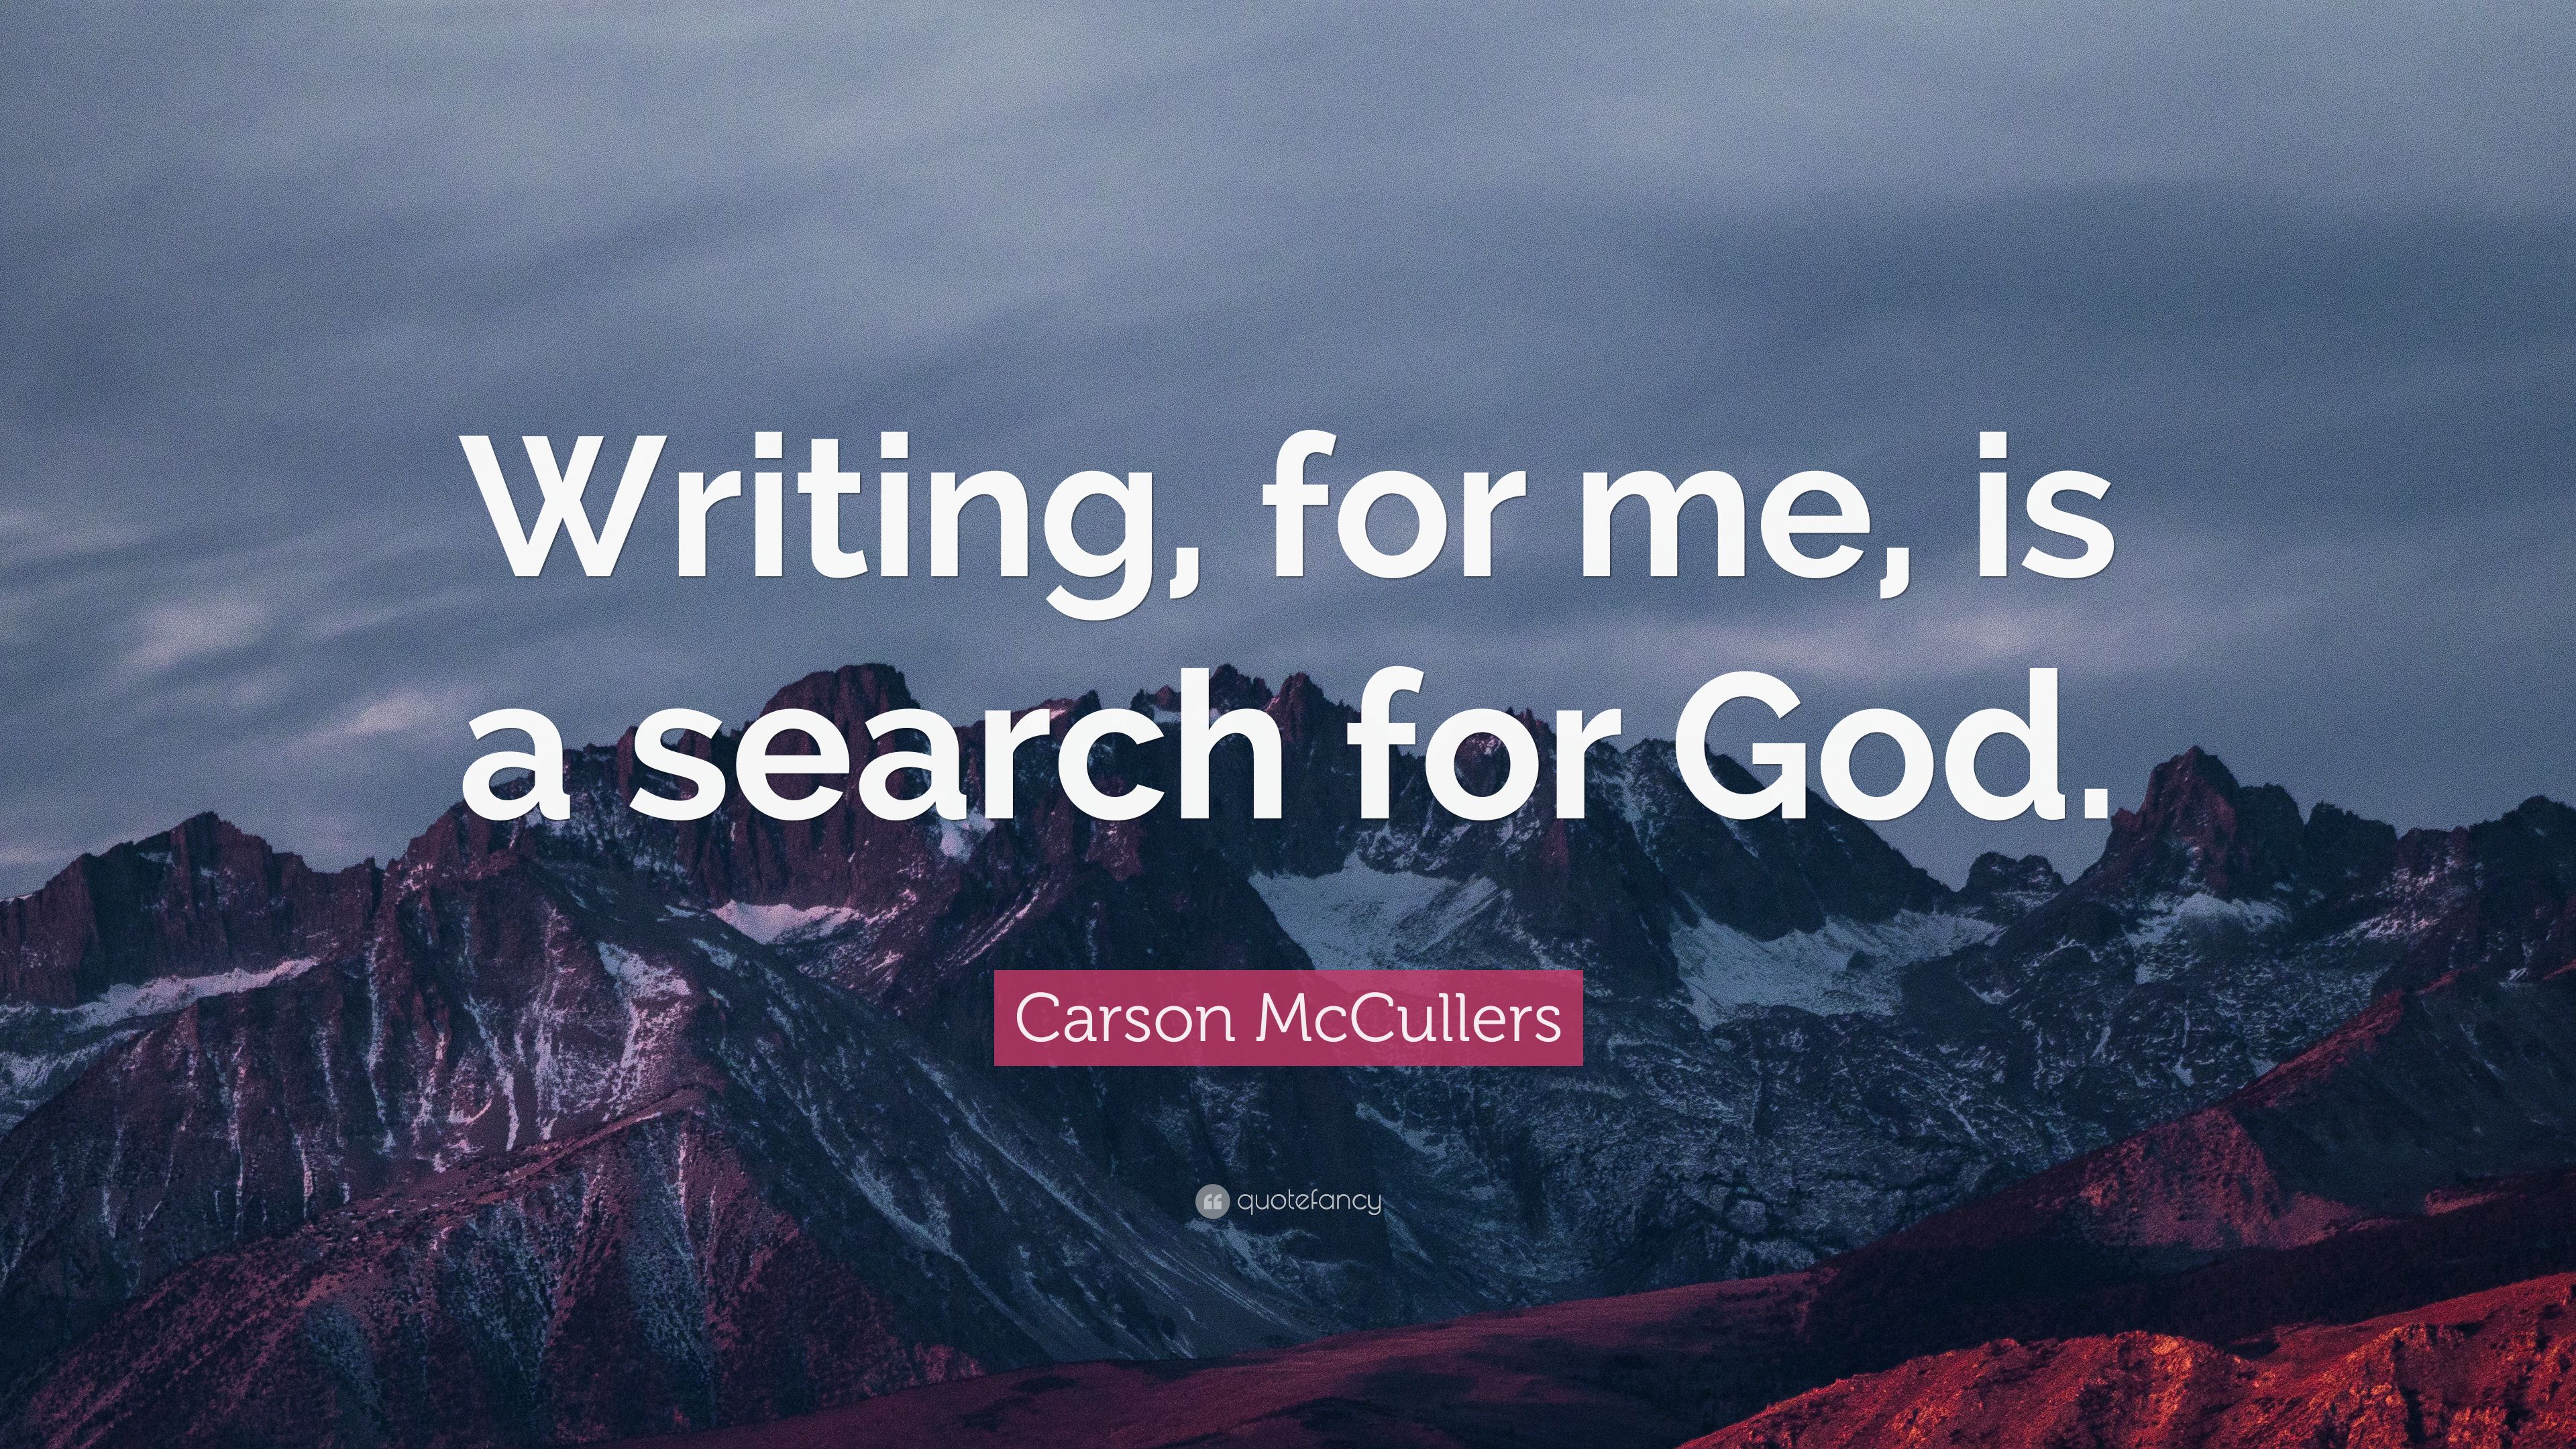 Carson McCullers Quote: “Writing, for me, is a search for God.” 6